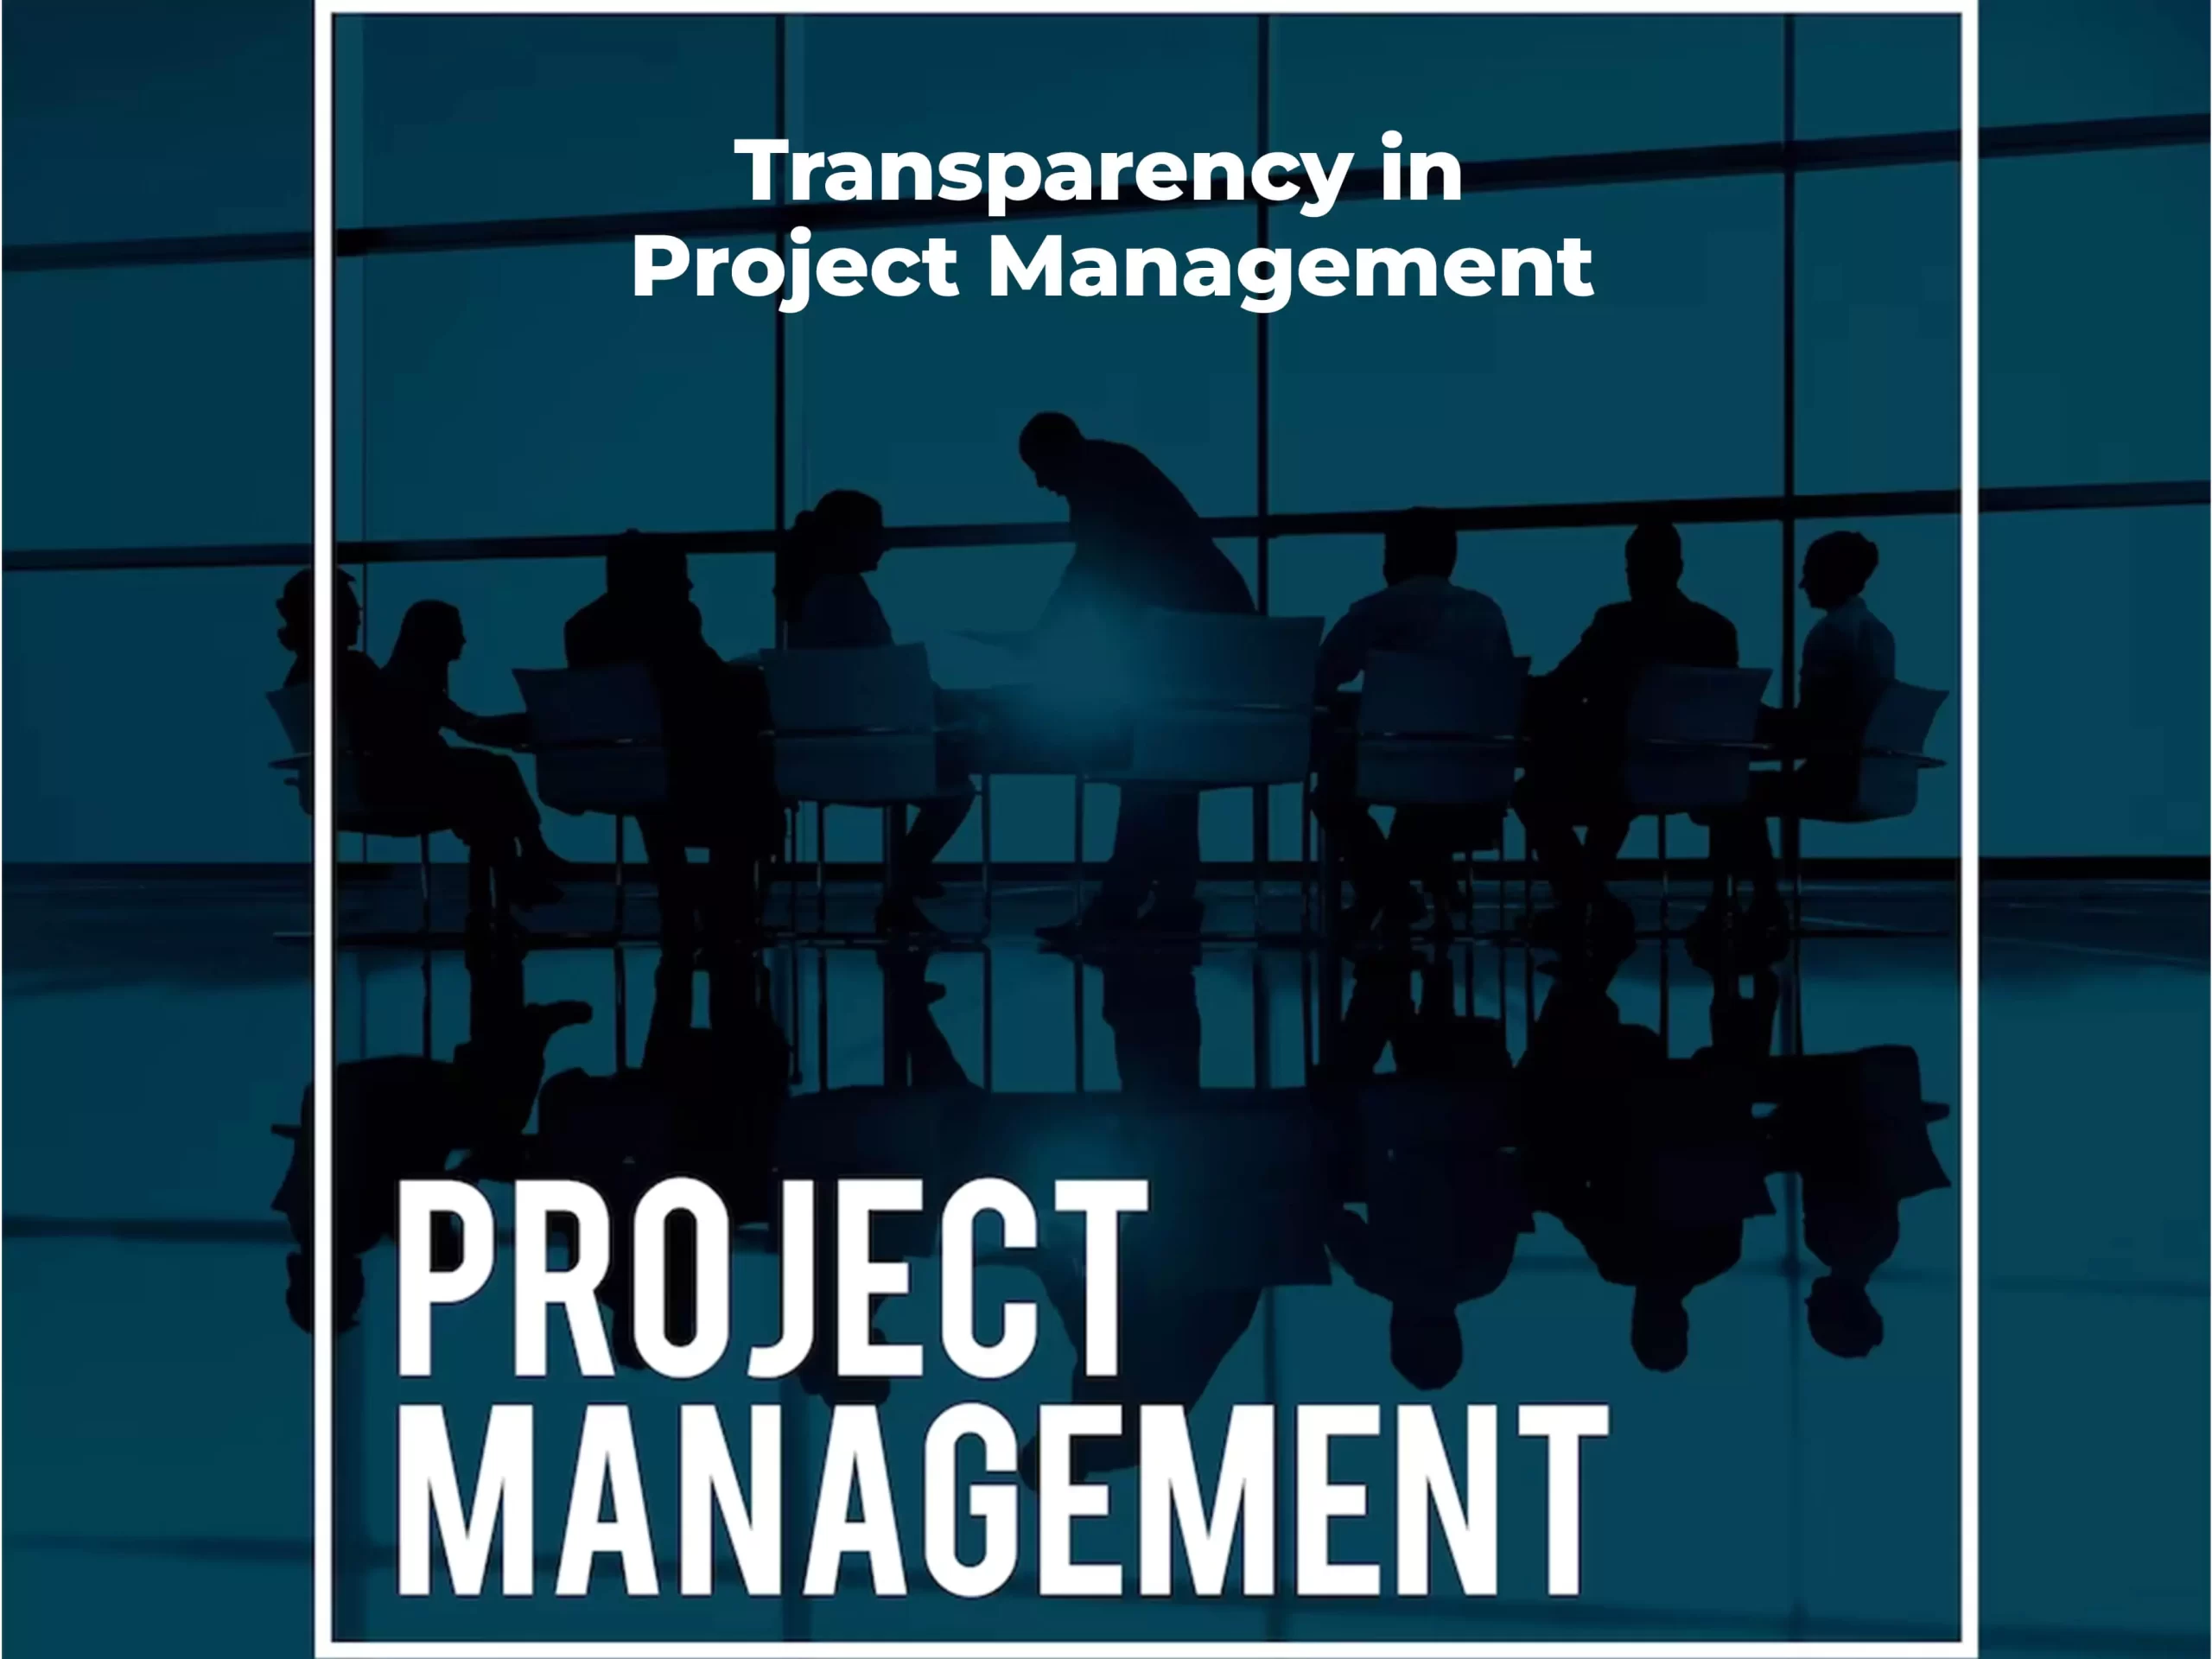 Transparency in Project Management